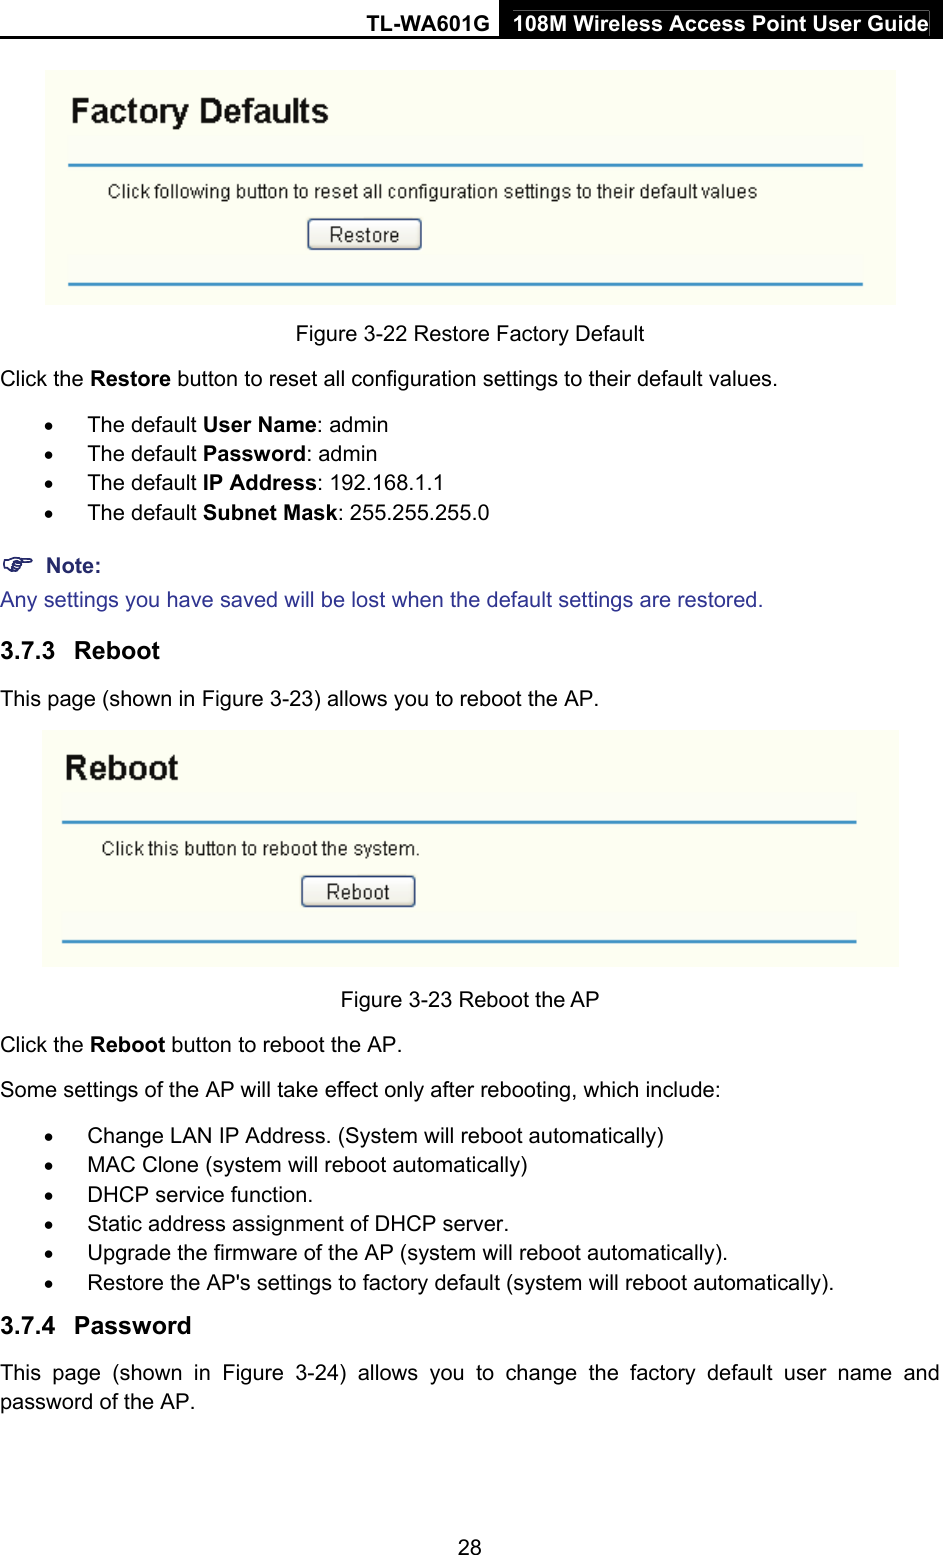 TL-WA601G 108M Wireless Access Point User Guide  28 Figure 3-22 Restore Factory Default Click the Restore button to reset all configuration settings to their default values.   • The default User Name: admin • The default Password: admin • The default IP Address: 192.168.1.1 • The default Subnet Mask: 255.255.255.0 ) Note: Any settings you have saved will be lost when the default settings are restored. 3.7.3  Reboot This page (shown in Figure 3-23) allows you to reboot the AP.  Figure 3-23 Reboot the AP Click the Reboot button to reboot the AP. Some settings of the AP will take effect only after rebooting, which include: • Change LAN IP Address. (System will reboot automatically) • MAC Clone (system will reboot automatically) • DHCP service function. • Static address assignment of DHCP server. • Upgrade the firmware of the AP (system will reboot automatically). • Restore the AP&apos;s settings to factory default (system will reboot automatically). 3.7.4  Password This page (shown in Figure 3-24) allows you to change the factory default user name and password of the AP.   